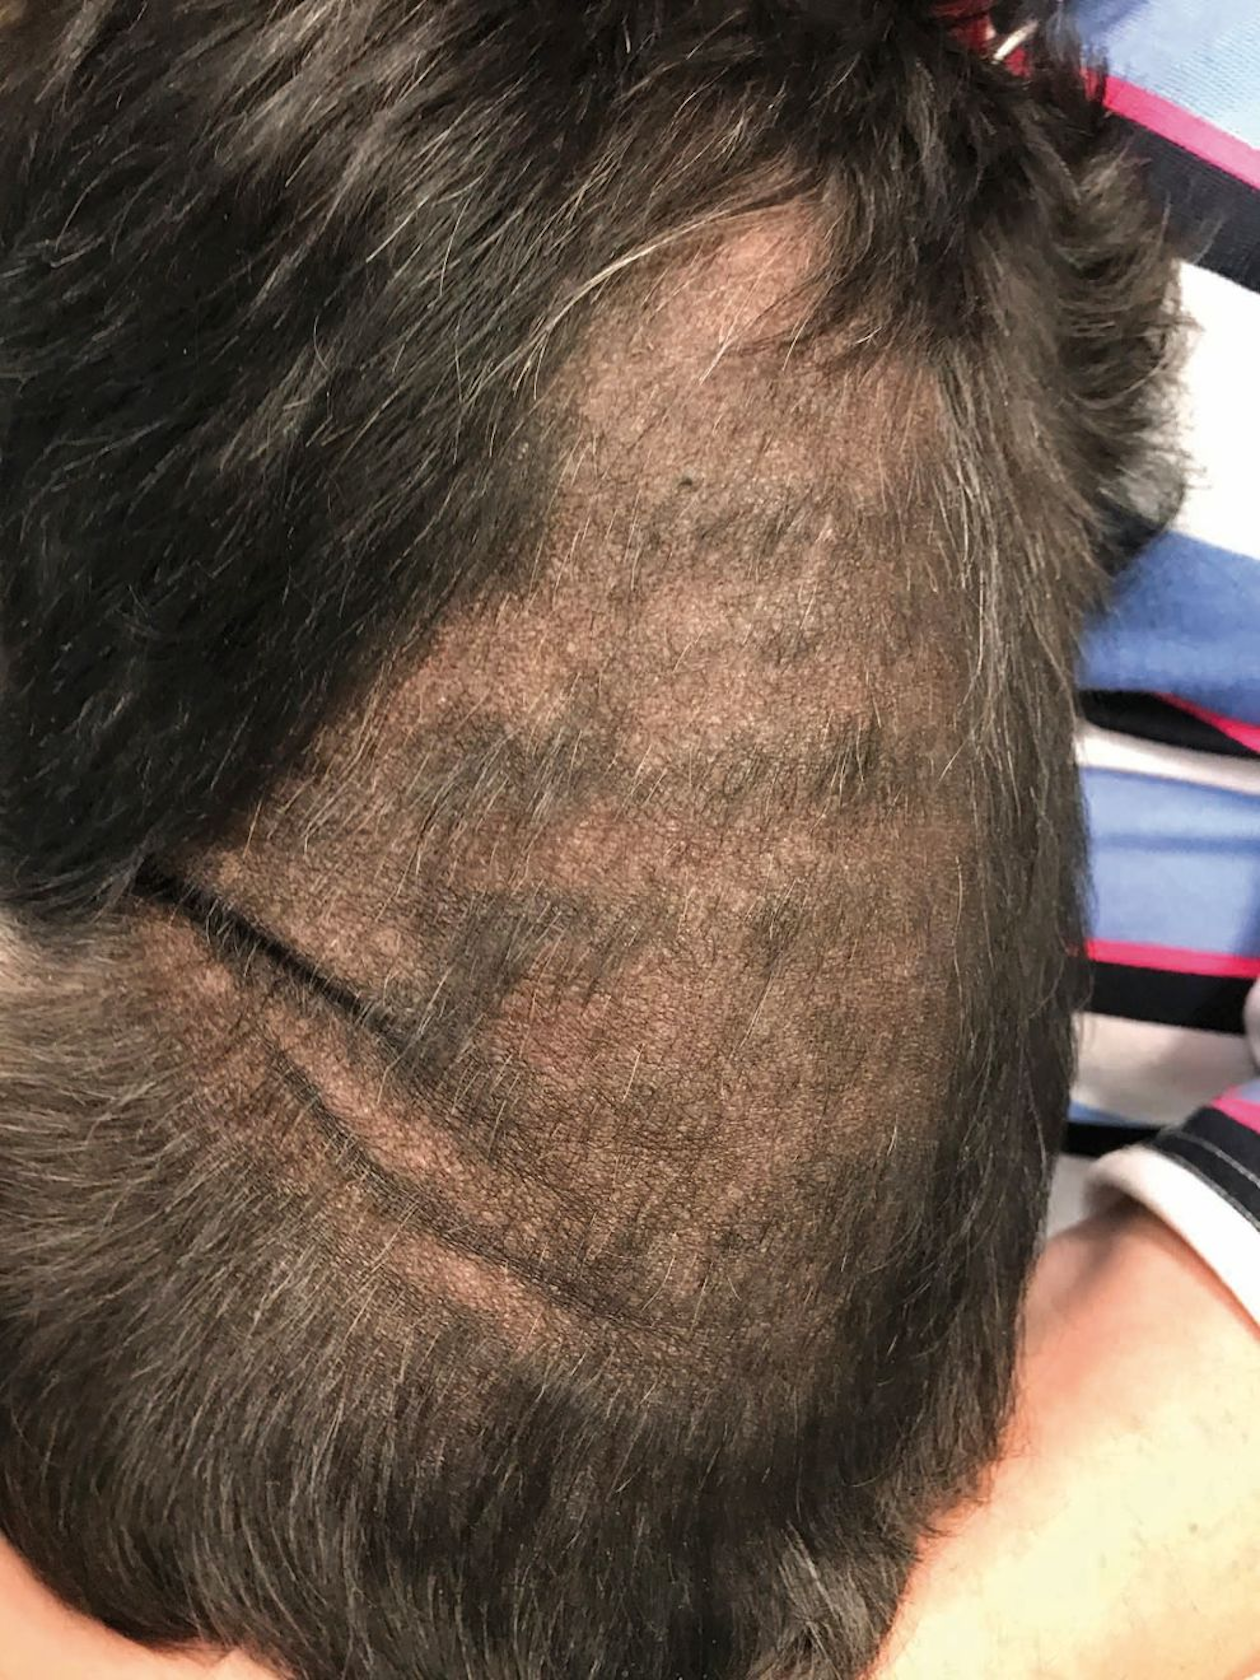 Owners may believe that some of the signs that can develop with hyperadrenocorticism, such as bilateral trunk hypotrichosis.